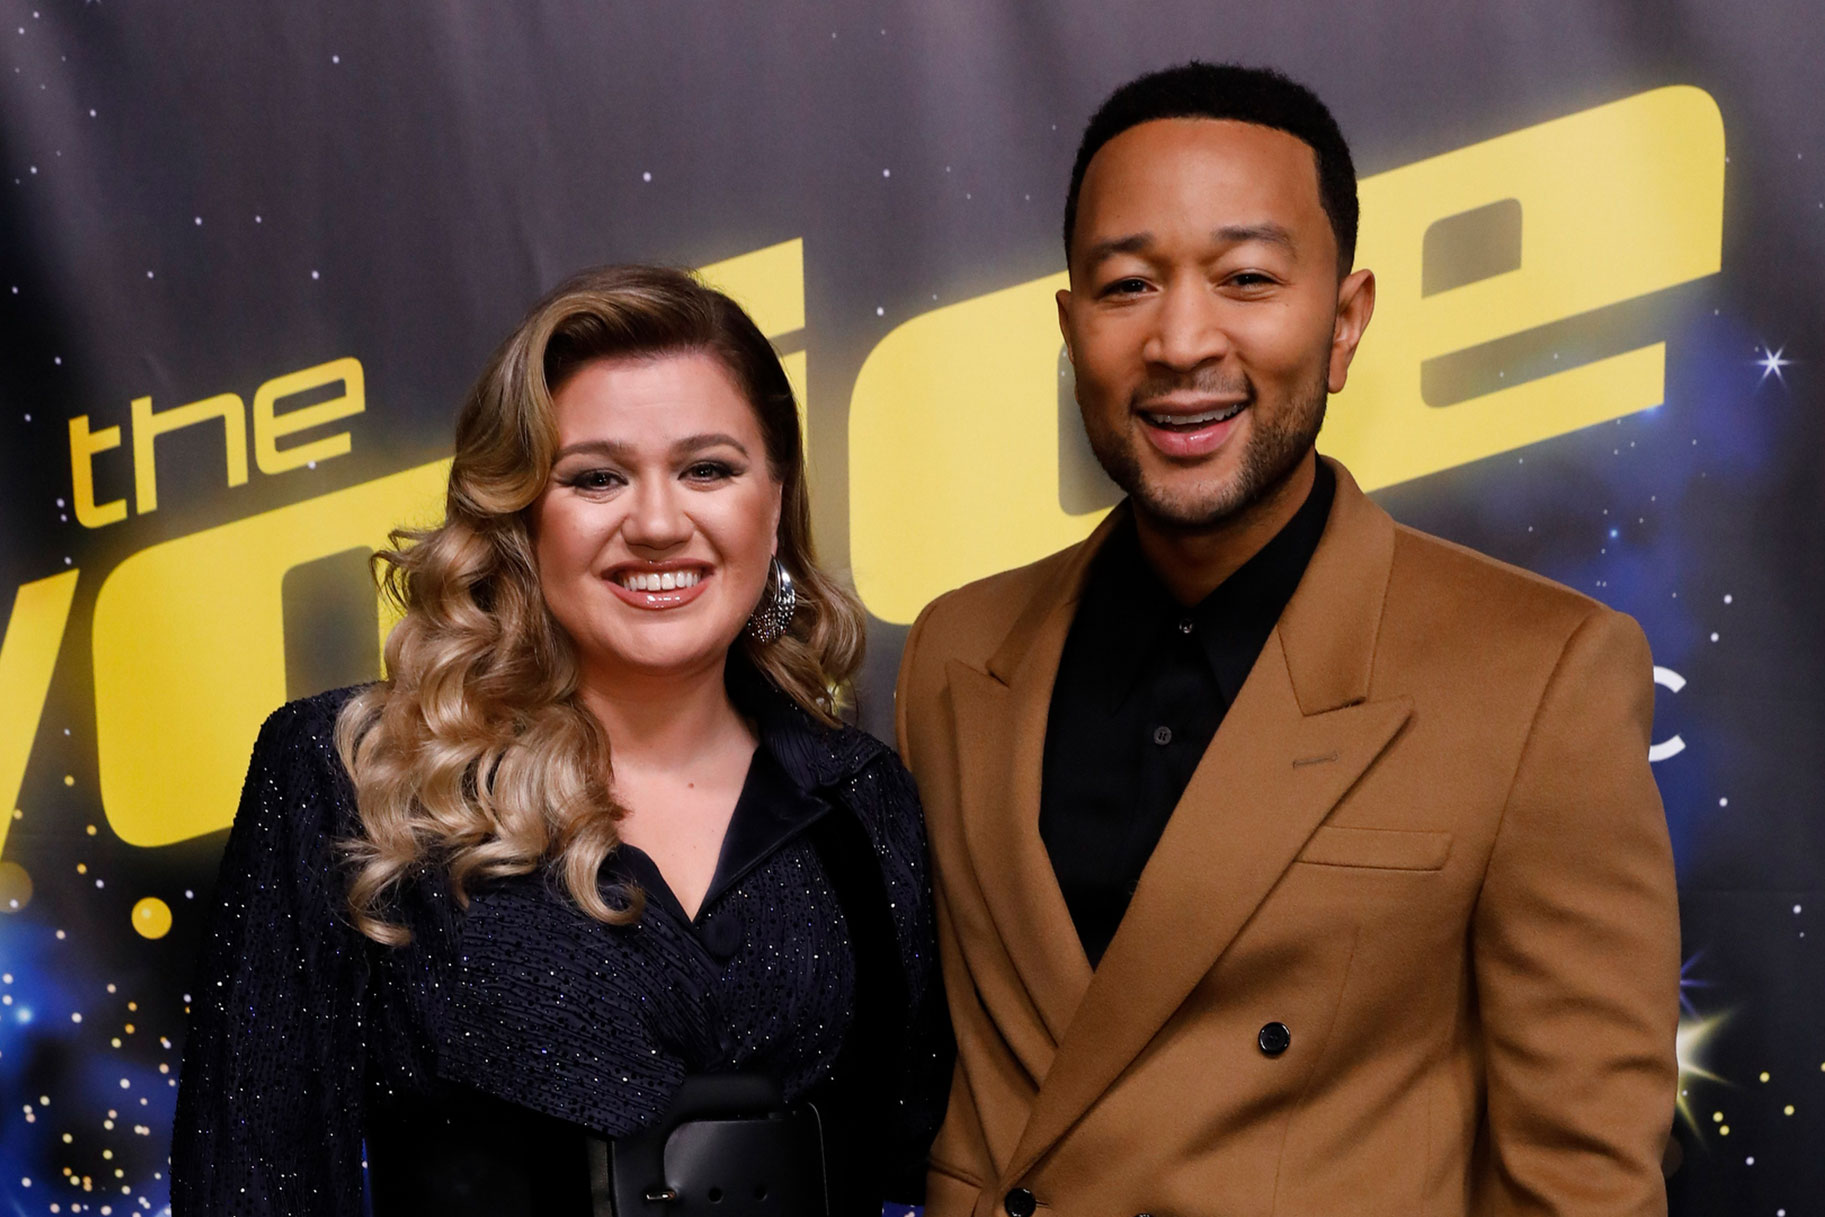 Kelly Clarkson and John Legend posing and smiling together